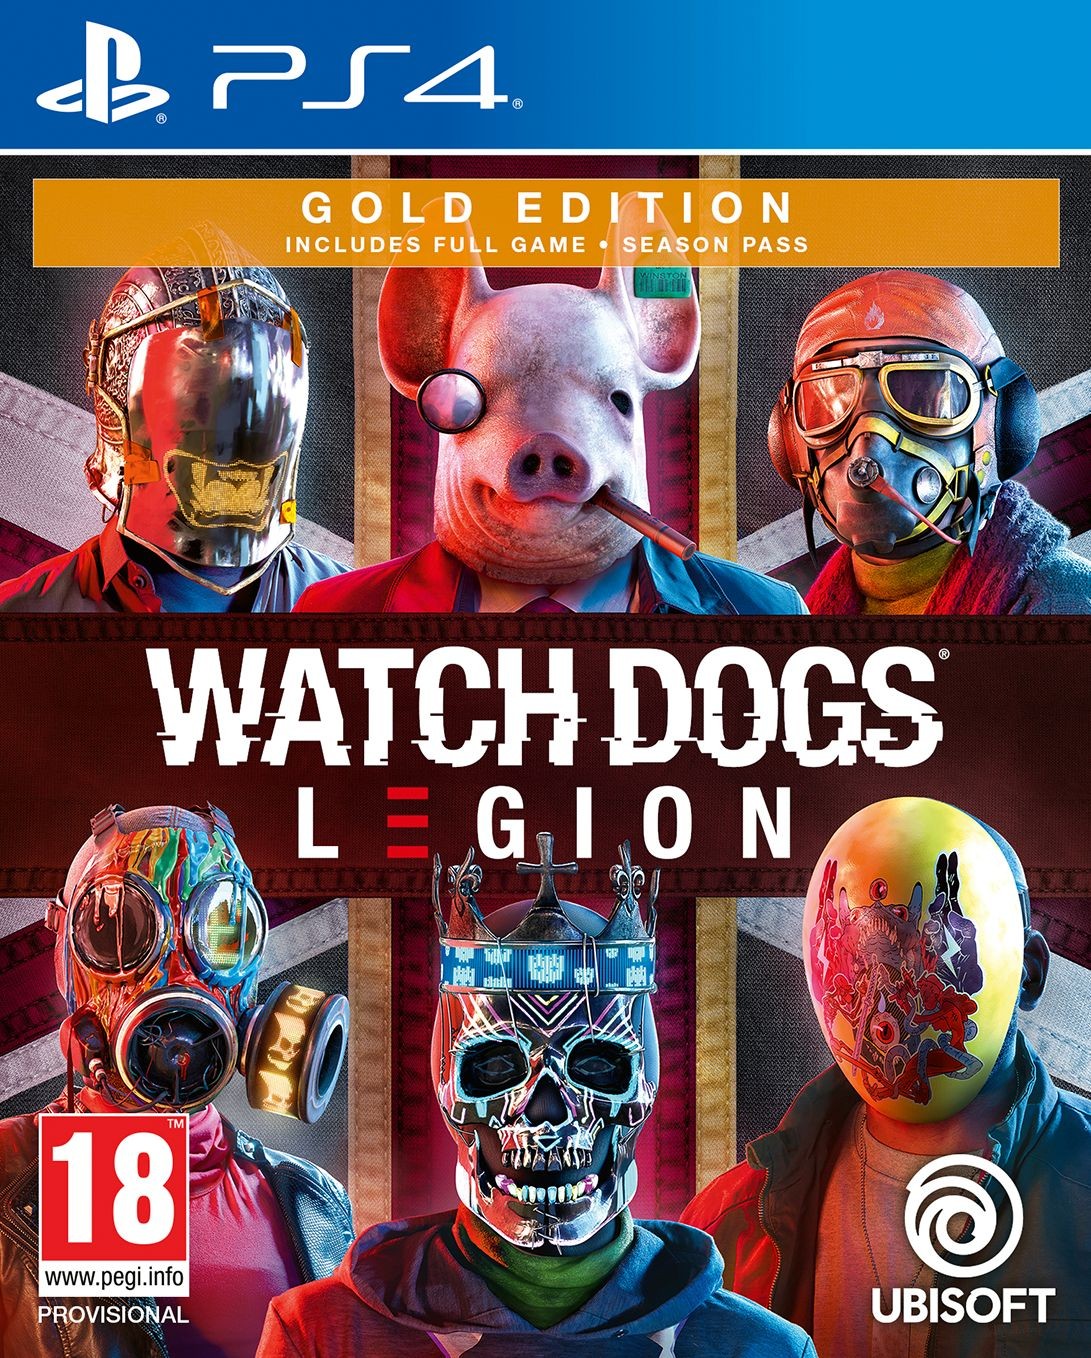 Watch Dogs: Legion - Gold Edition (PS4)Ubisoft